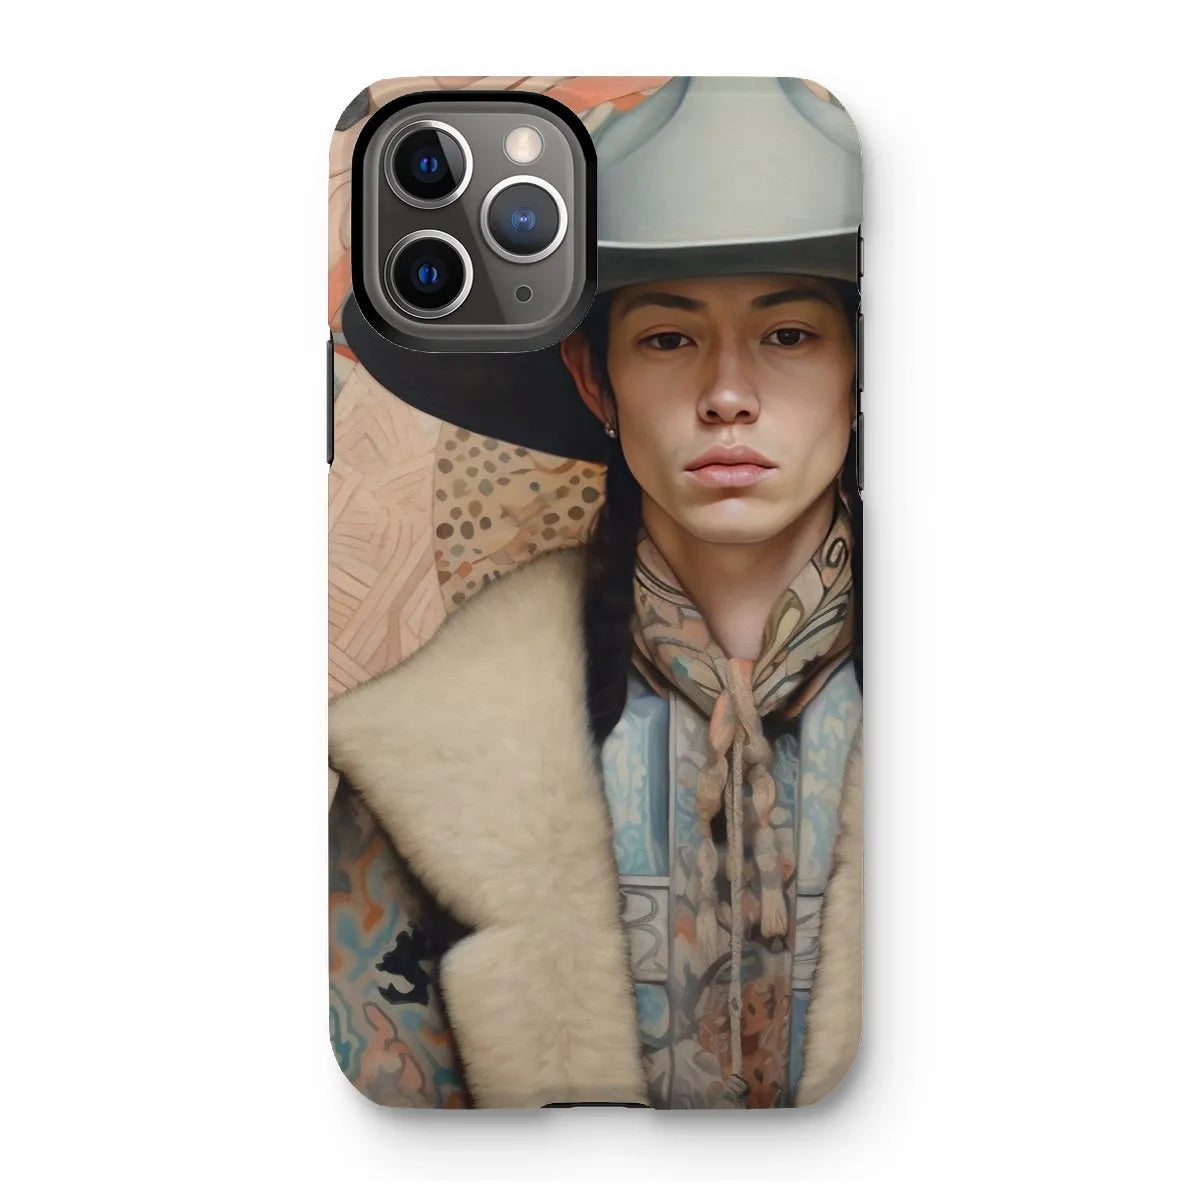 Jacy The Gay Cowboy - Dandy Gay Aesthetic Art Phone Case - Iphone 11 Pro / Matte - Mobile Phone Cases - Aesthetic Art